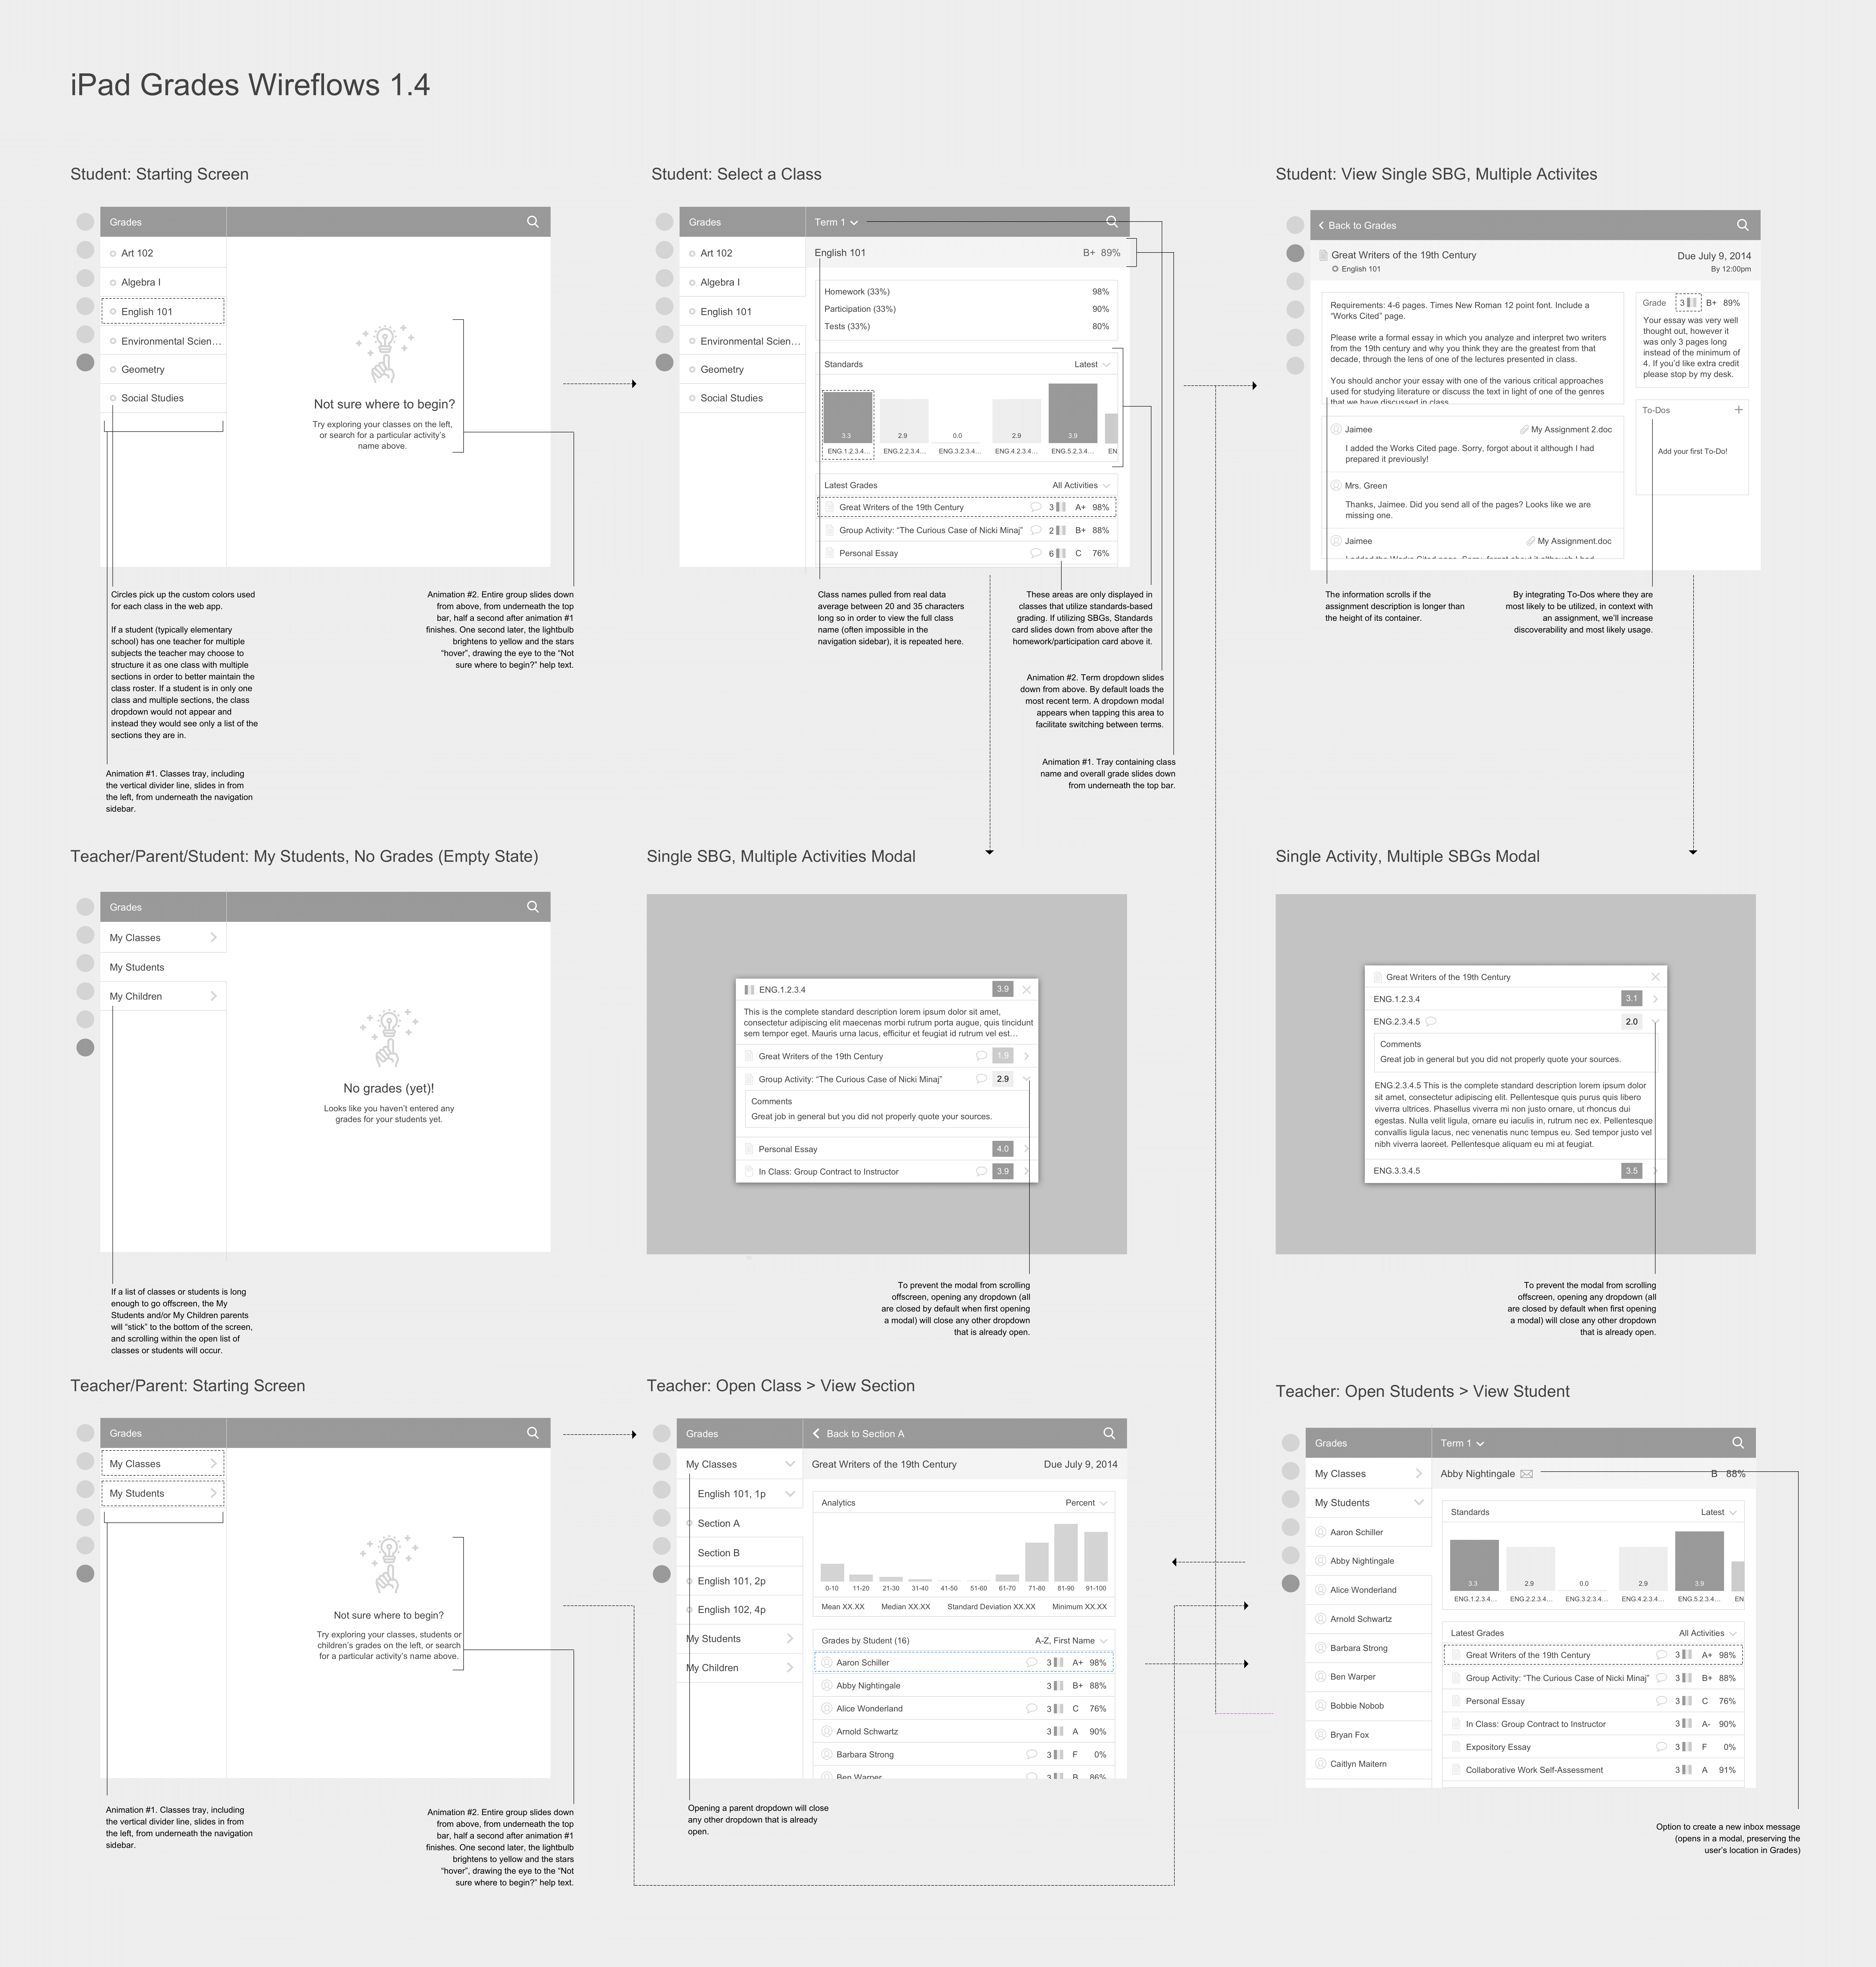 Wireflows (wireframes combined with user flows) for all tasks in the iPad app